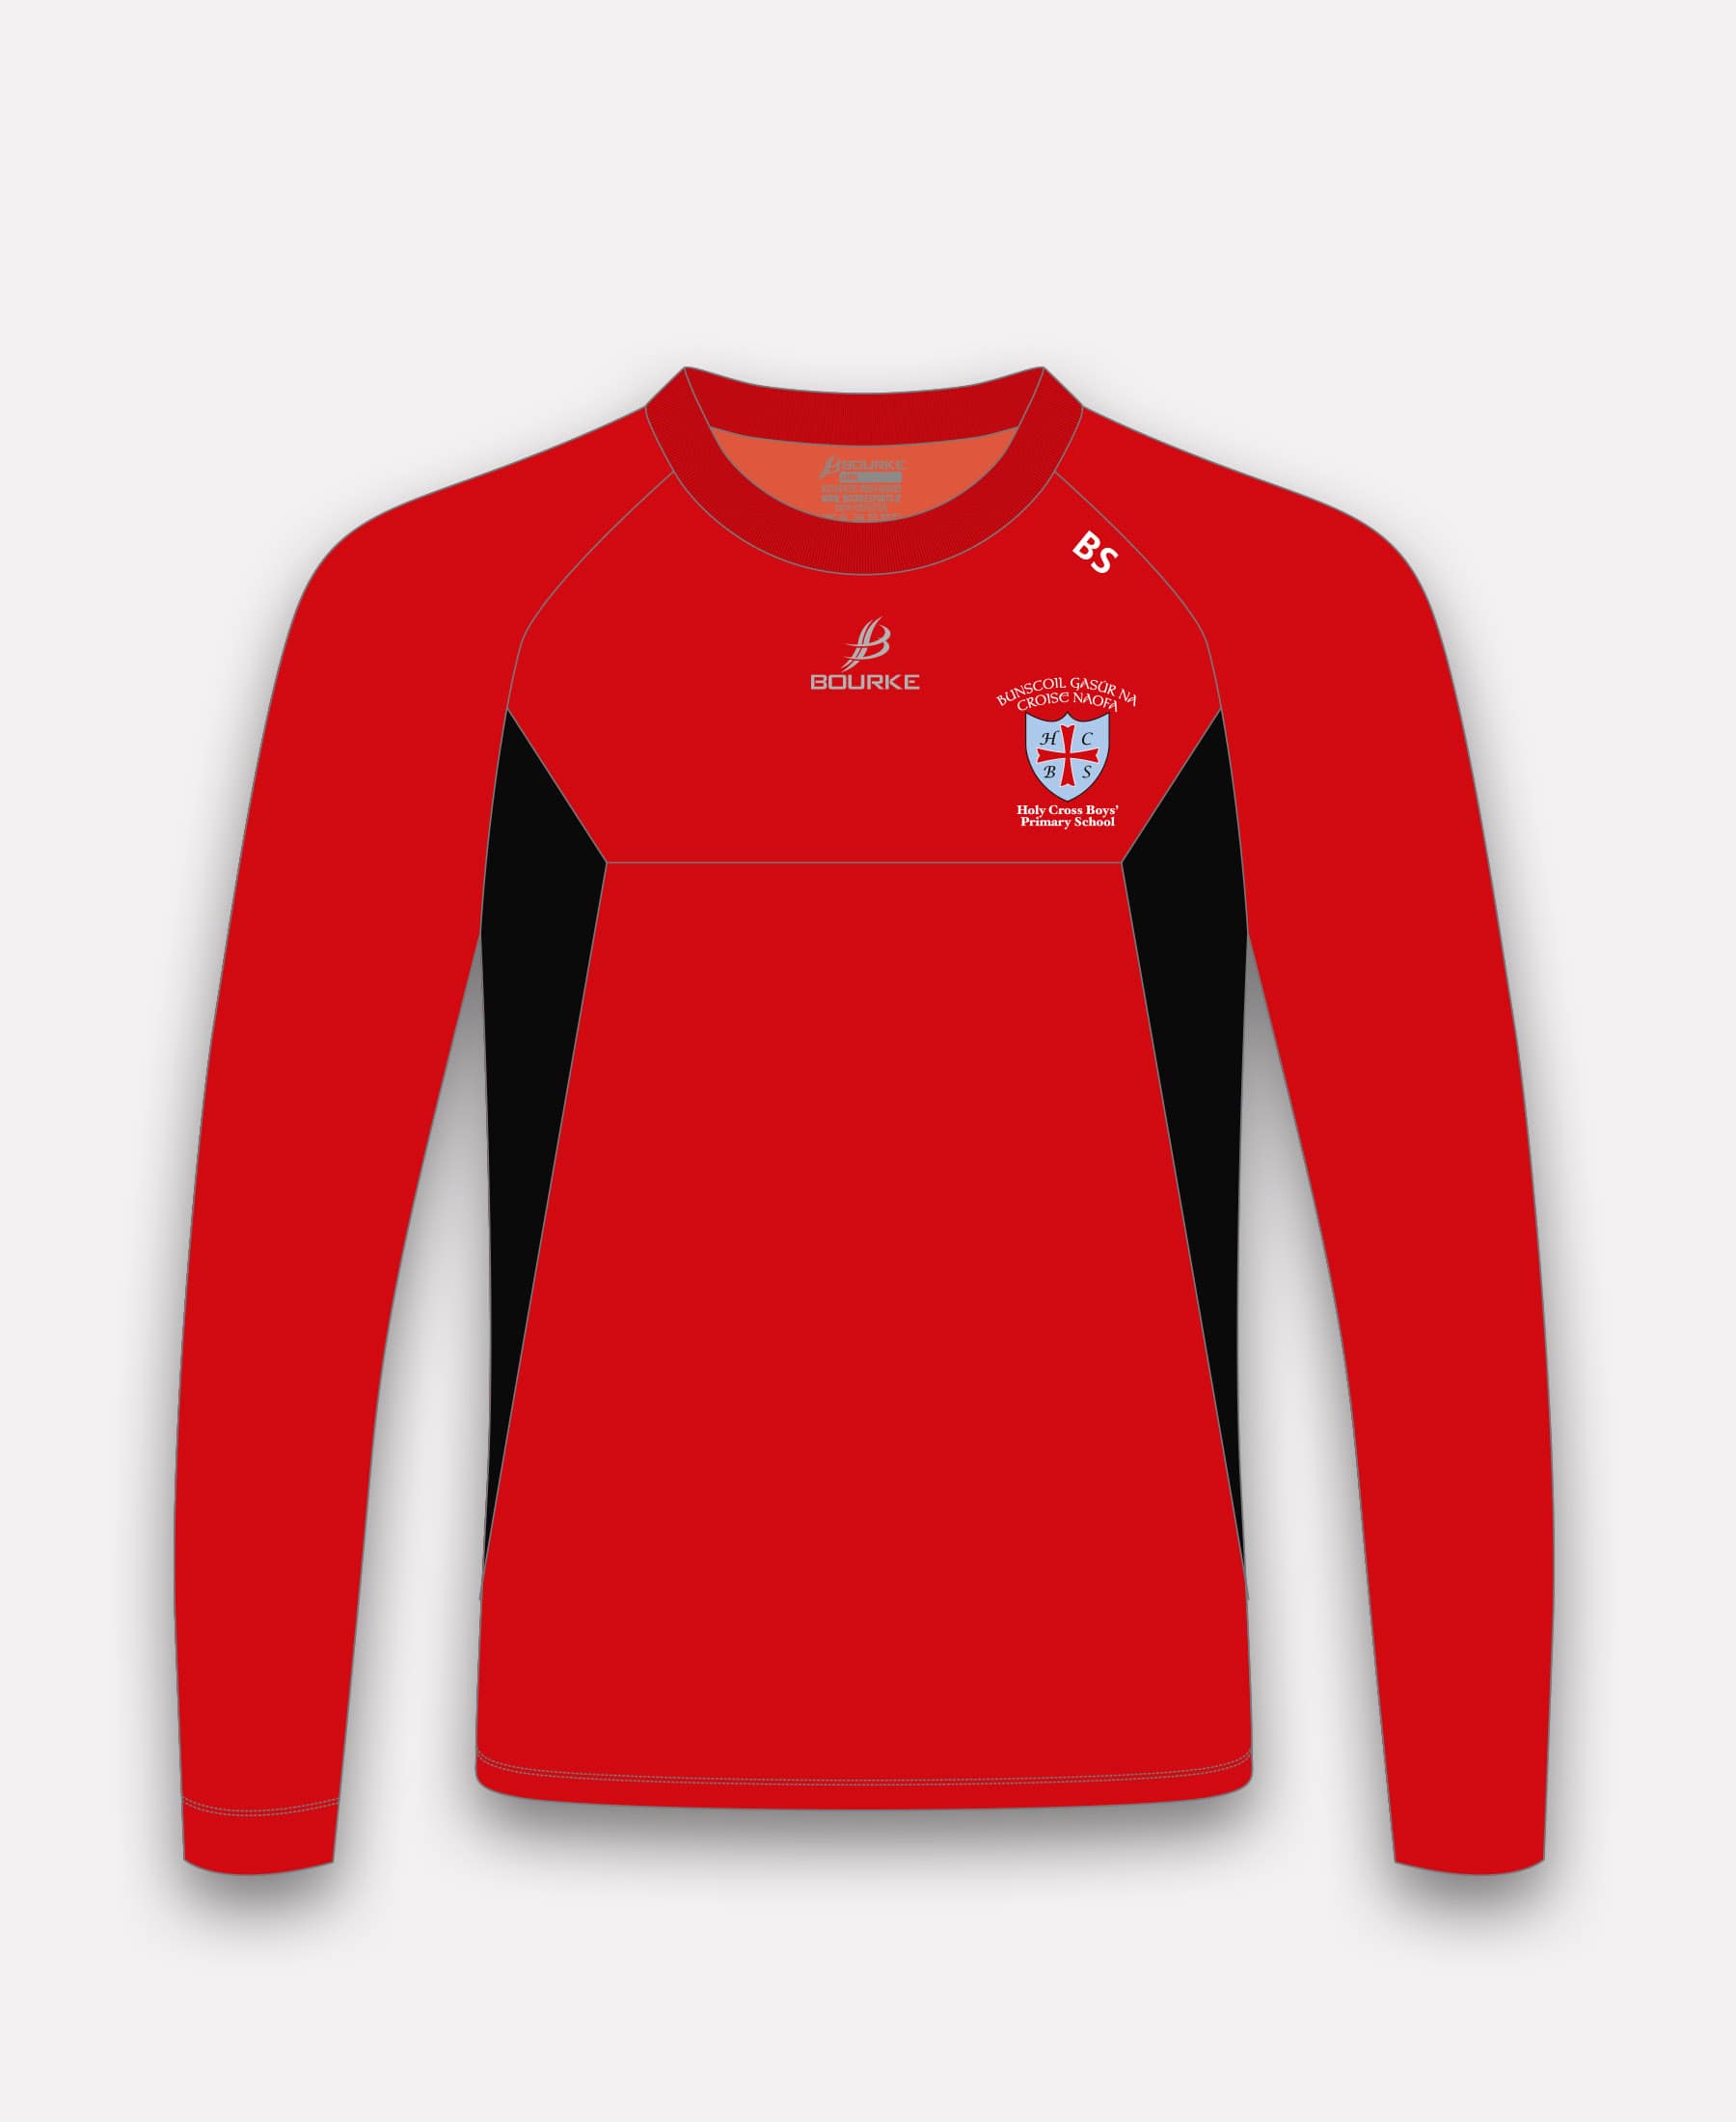 Holy Cross Boys PS BARR Crew Neck (Red/Black)